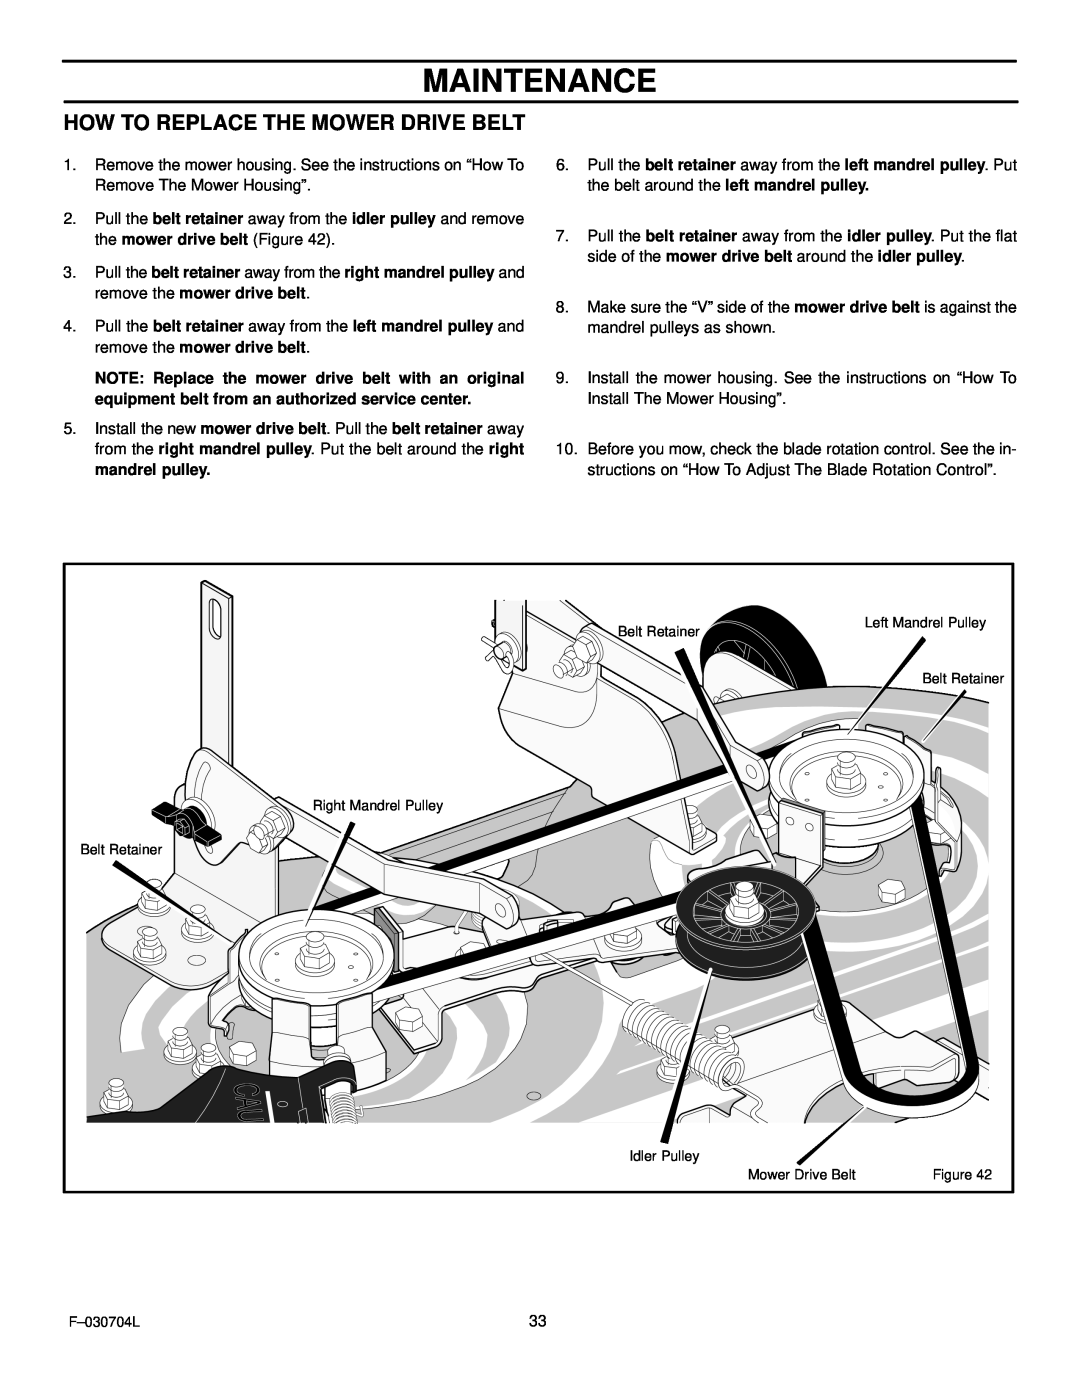 Murray 425303x92B manual Maintenance, How To Replace The Mower Drive Belt 